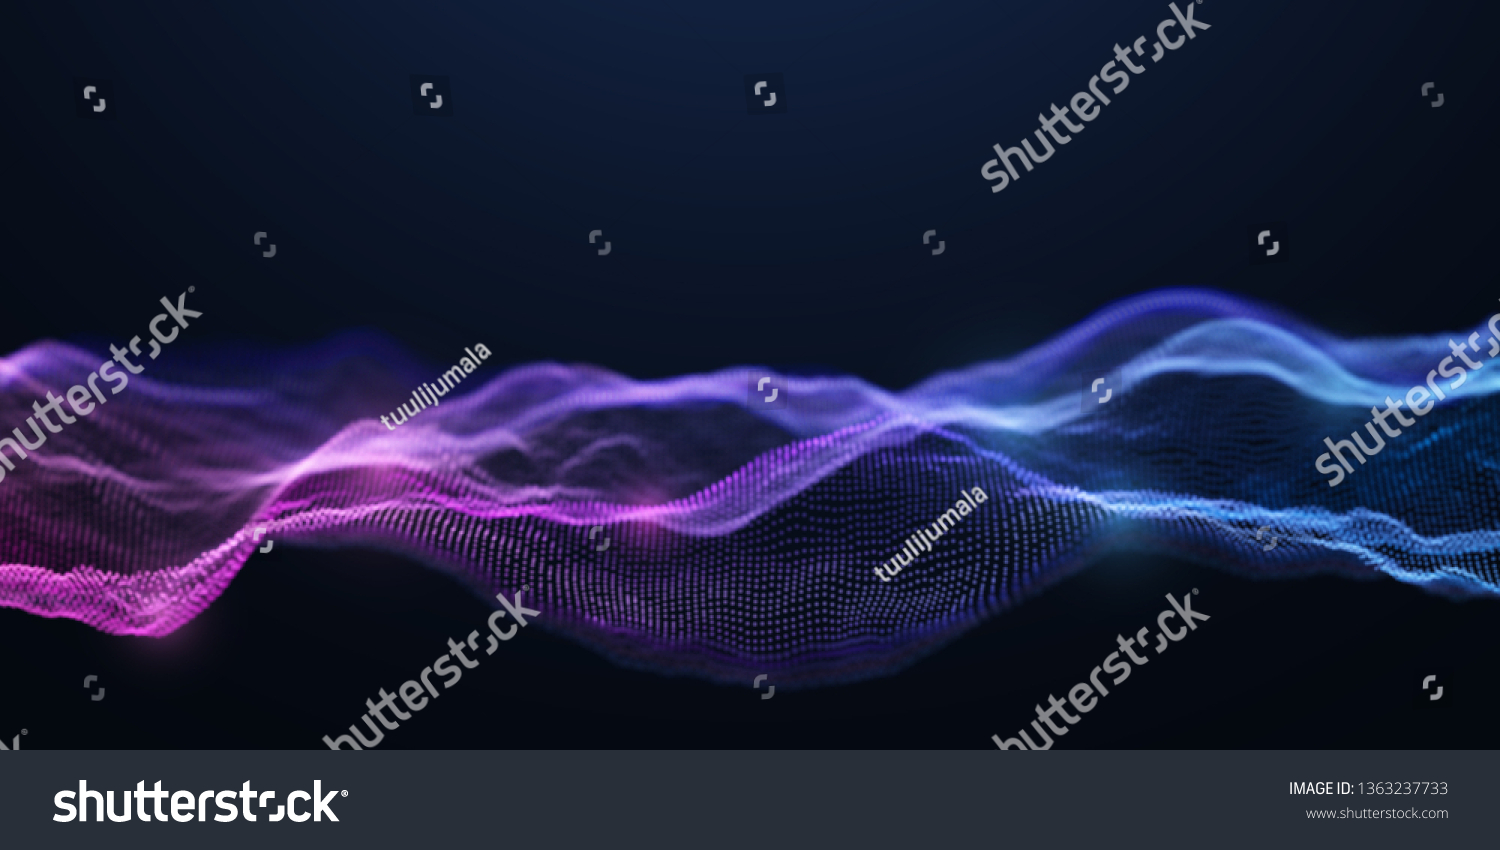 Blue and Purple Wavy Particle Surface on Black Background. Abstract Technology or Science Banner. Cyber Space Background. Particles with DOF Effect. EPS10 Vector Illustration. #1363237733